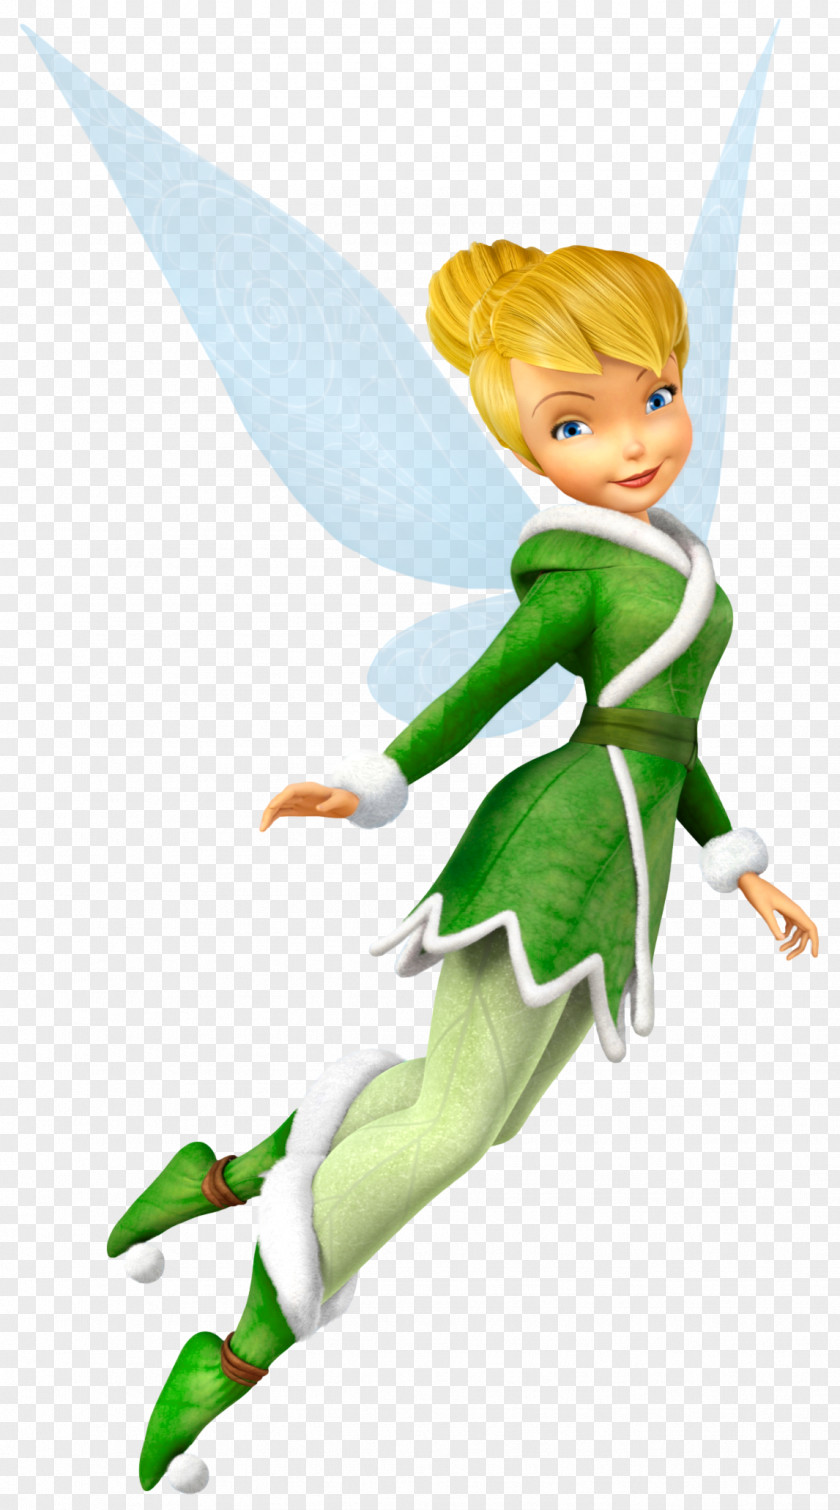 TinkerBell Fairy PNG Cartoon Freshly-Picked Tingle's Rosy Rupeeland PNG